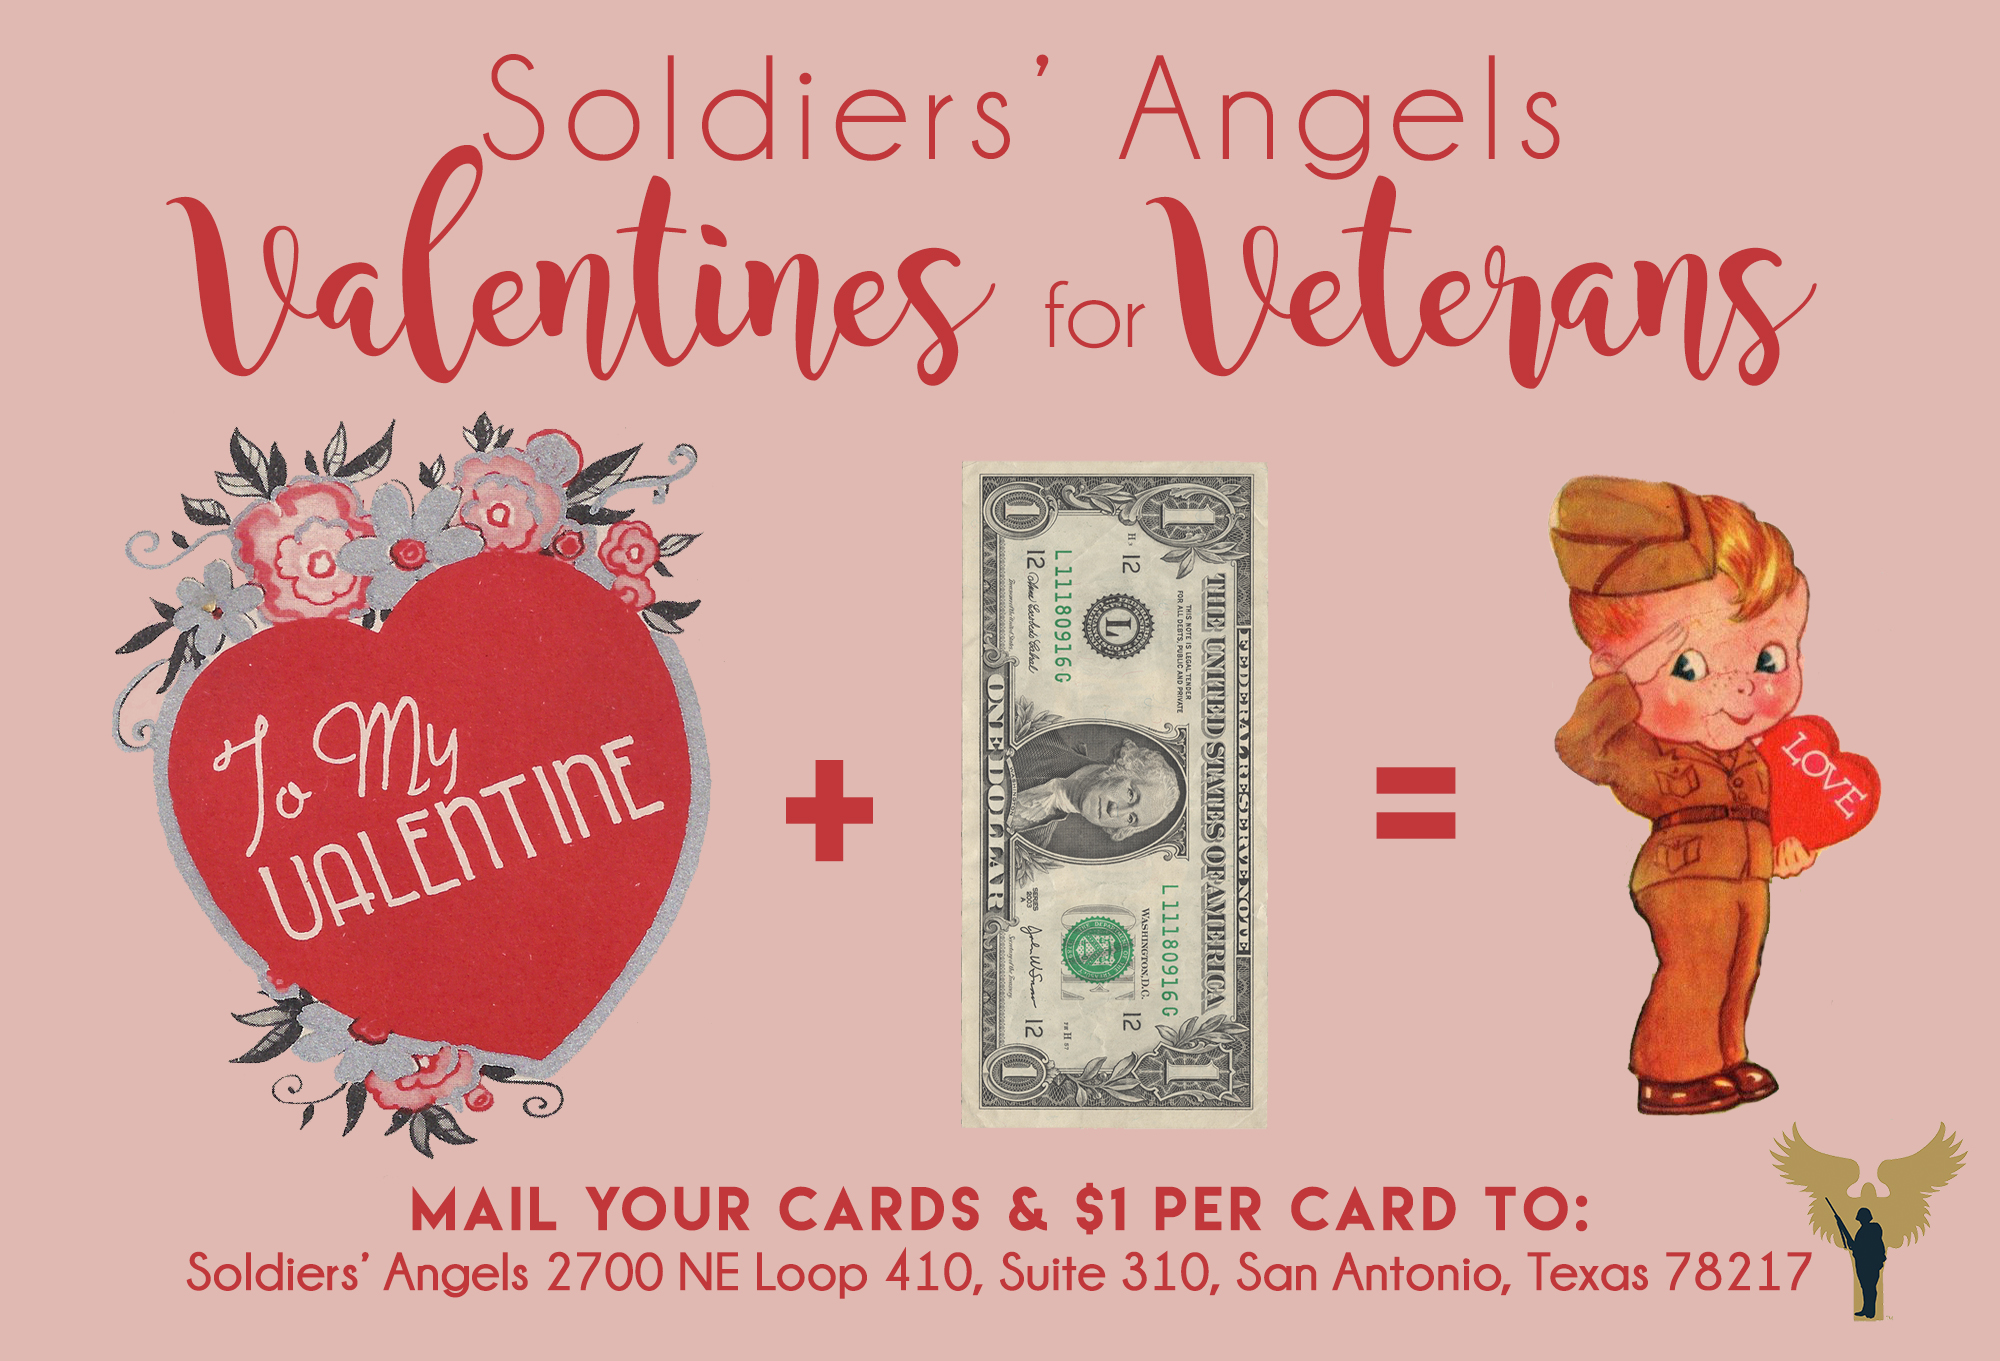 Send Our Troops and Veterans Valentines this Valentine's Day Soldiers